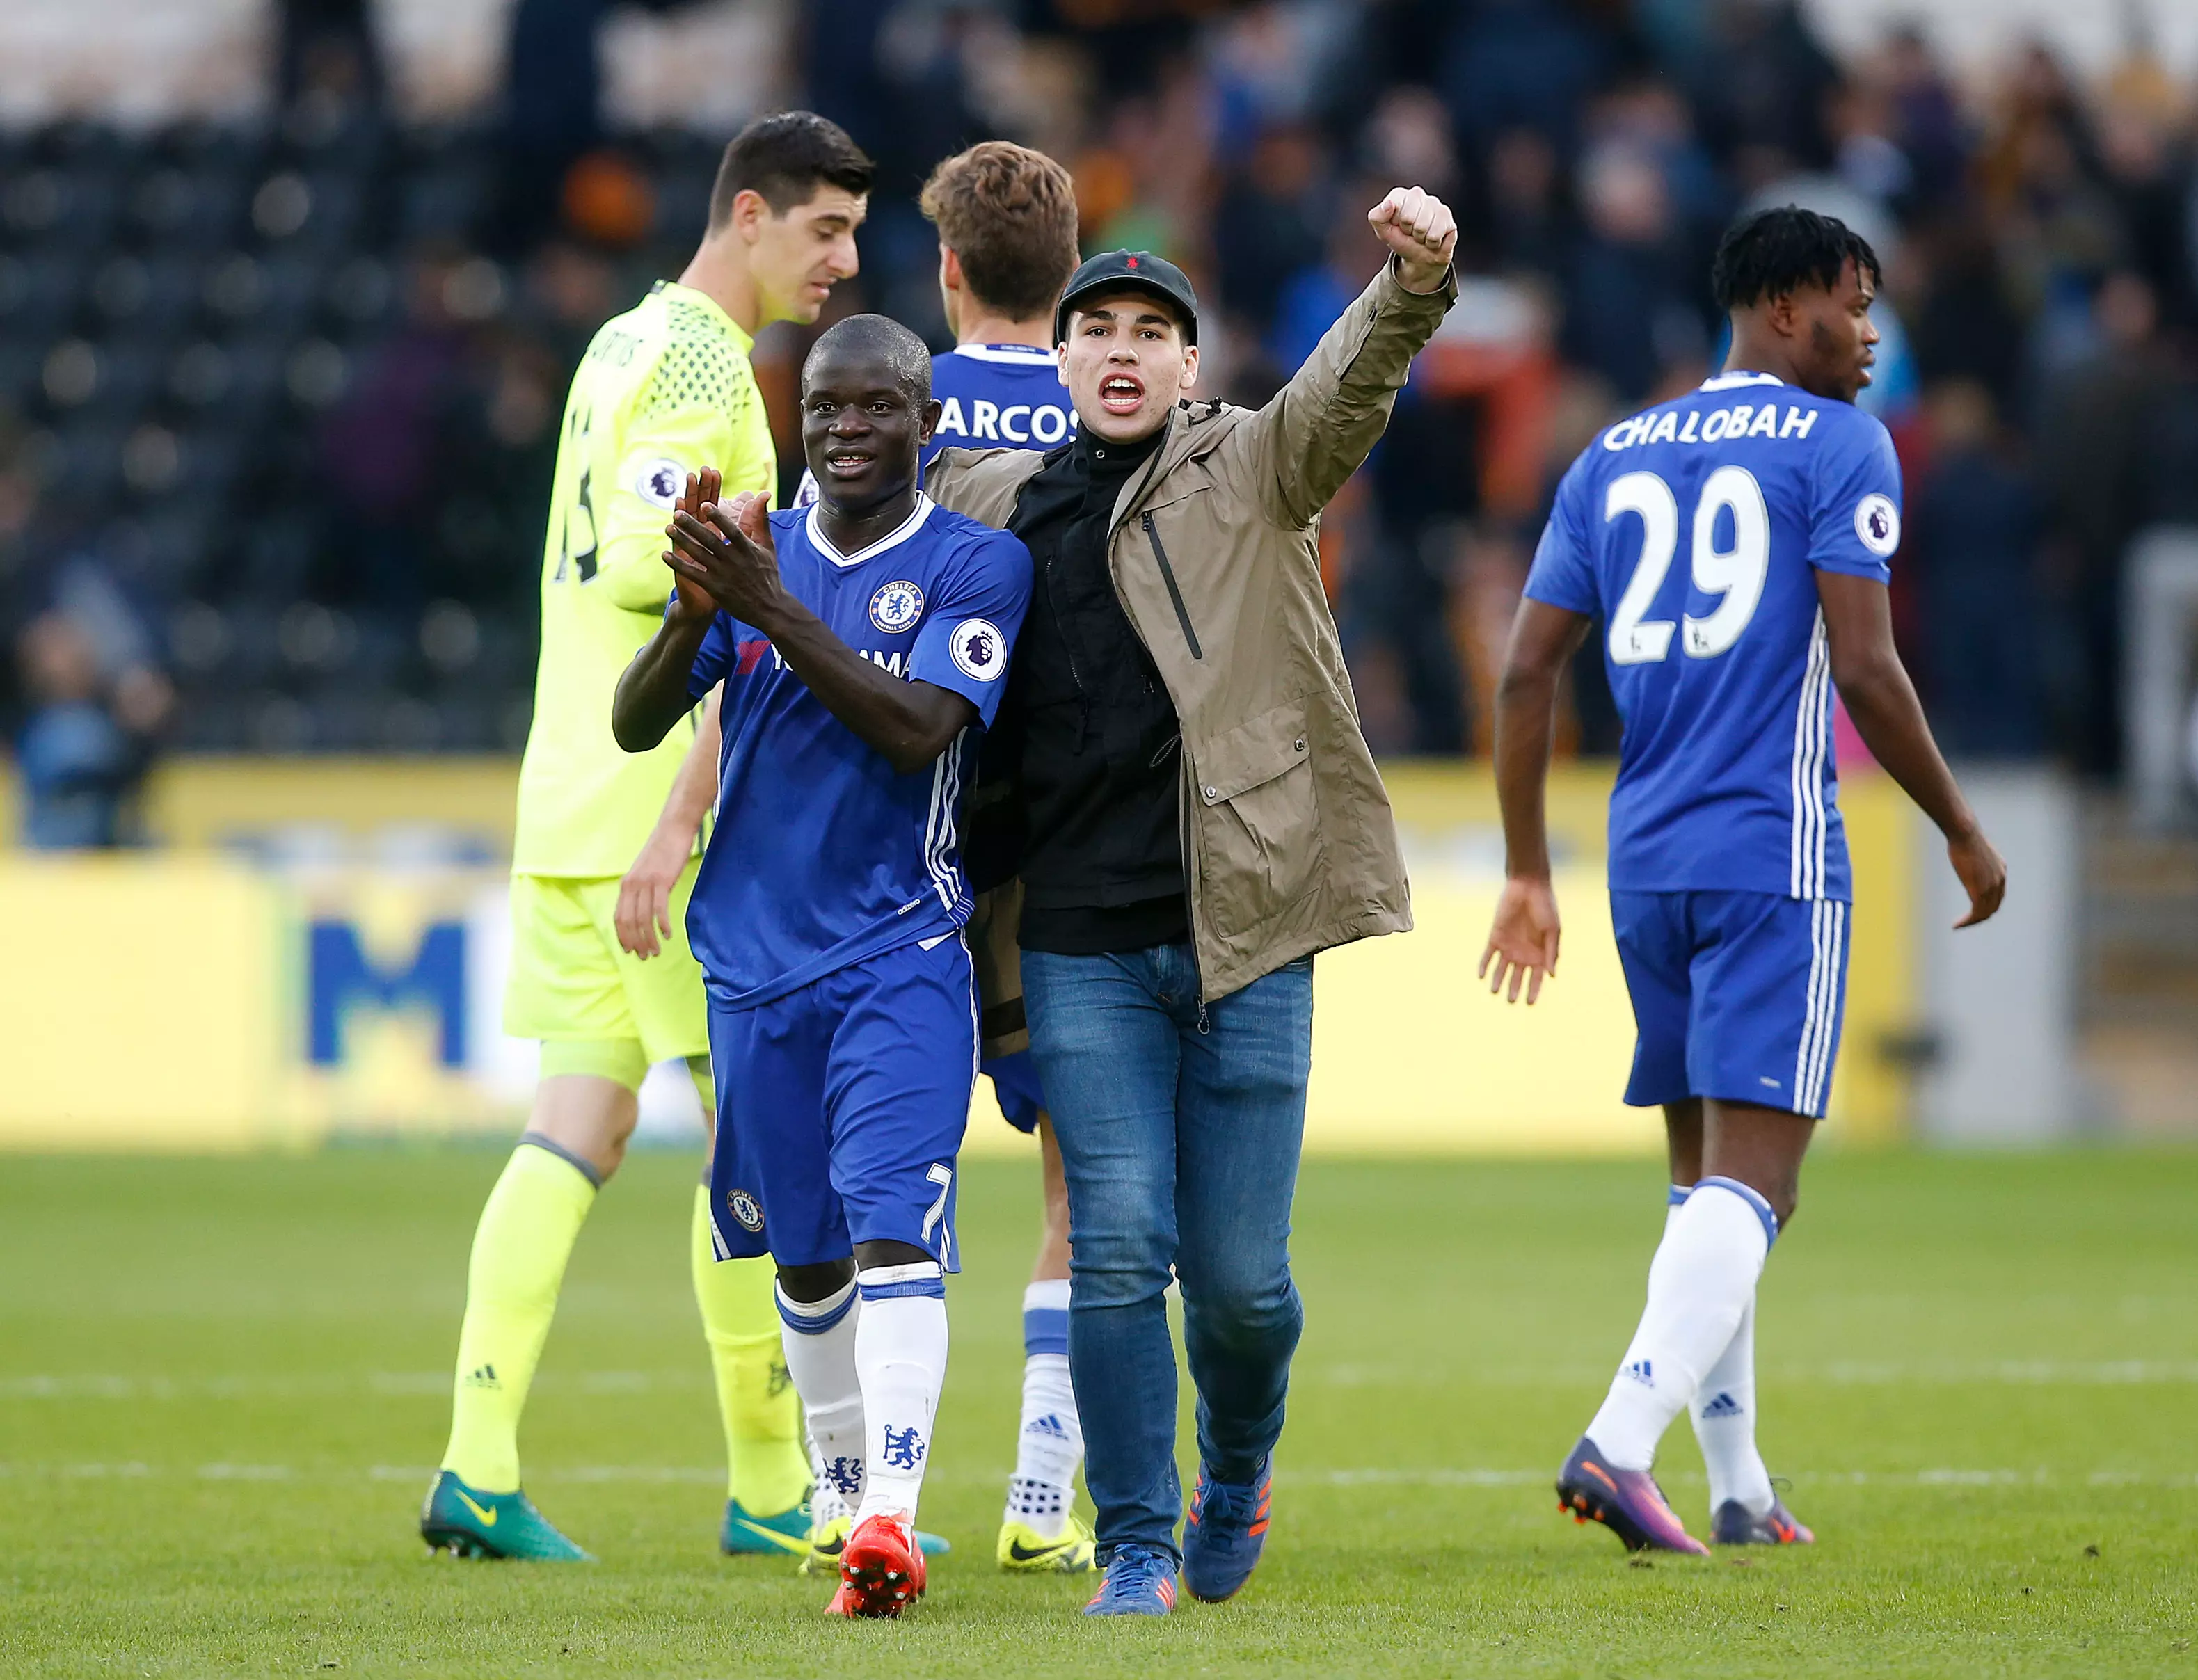 Kante became an instant hero at Stamford Bridge, last season, helping Chelsea to a comfortable Premier League title triumph. Images: PA